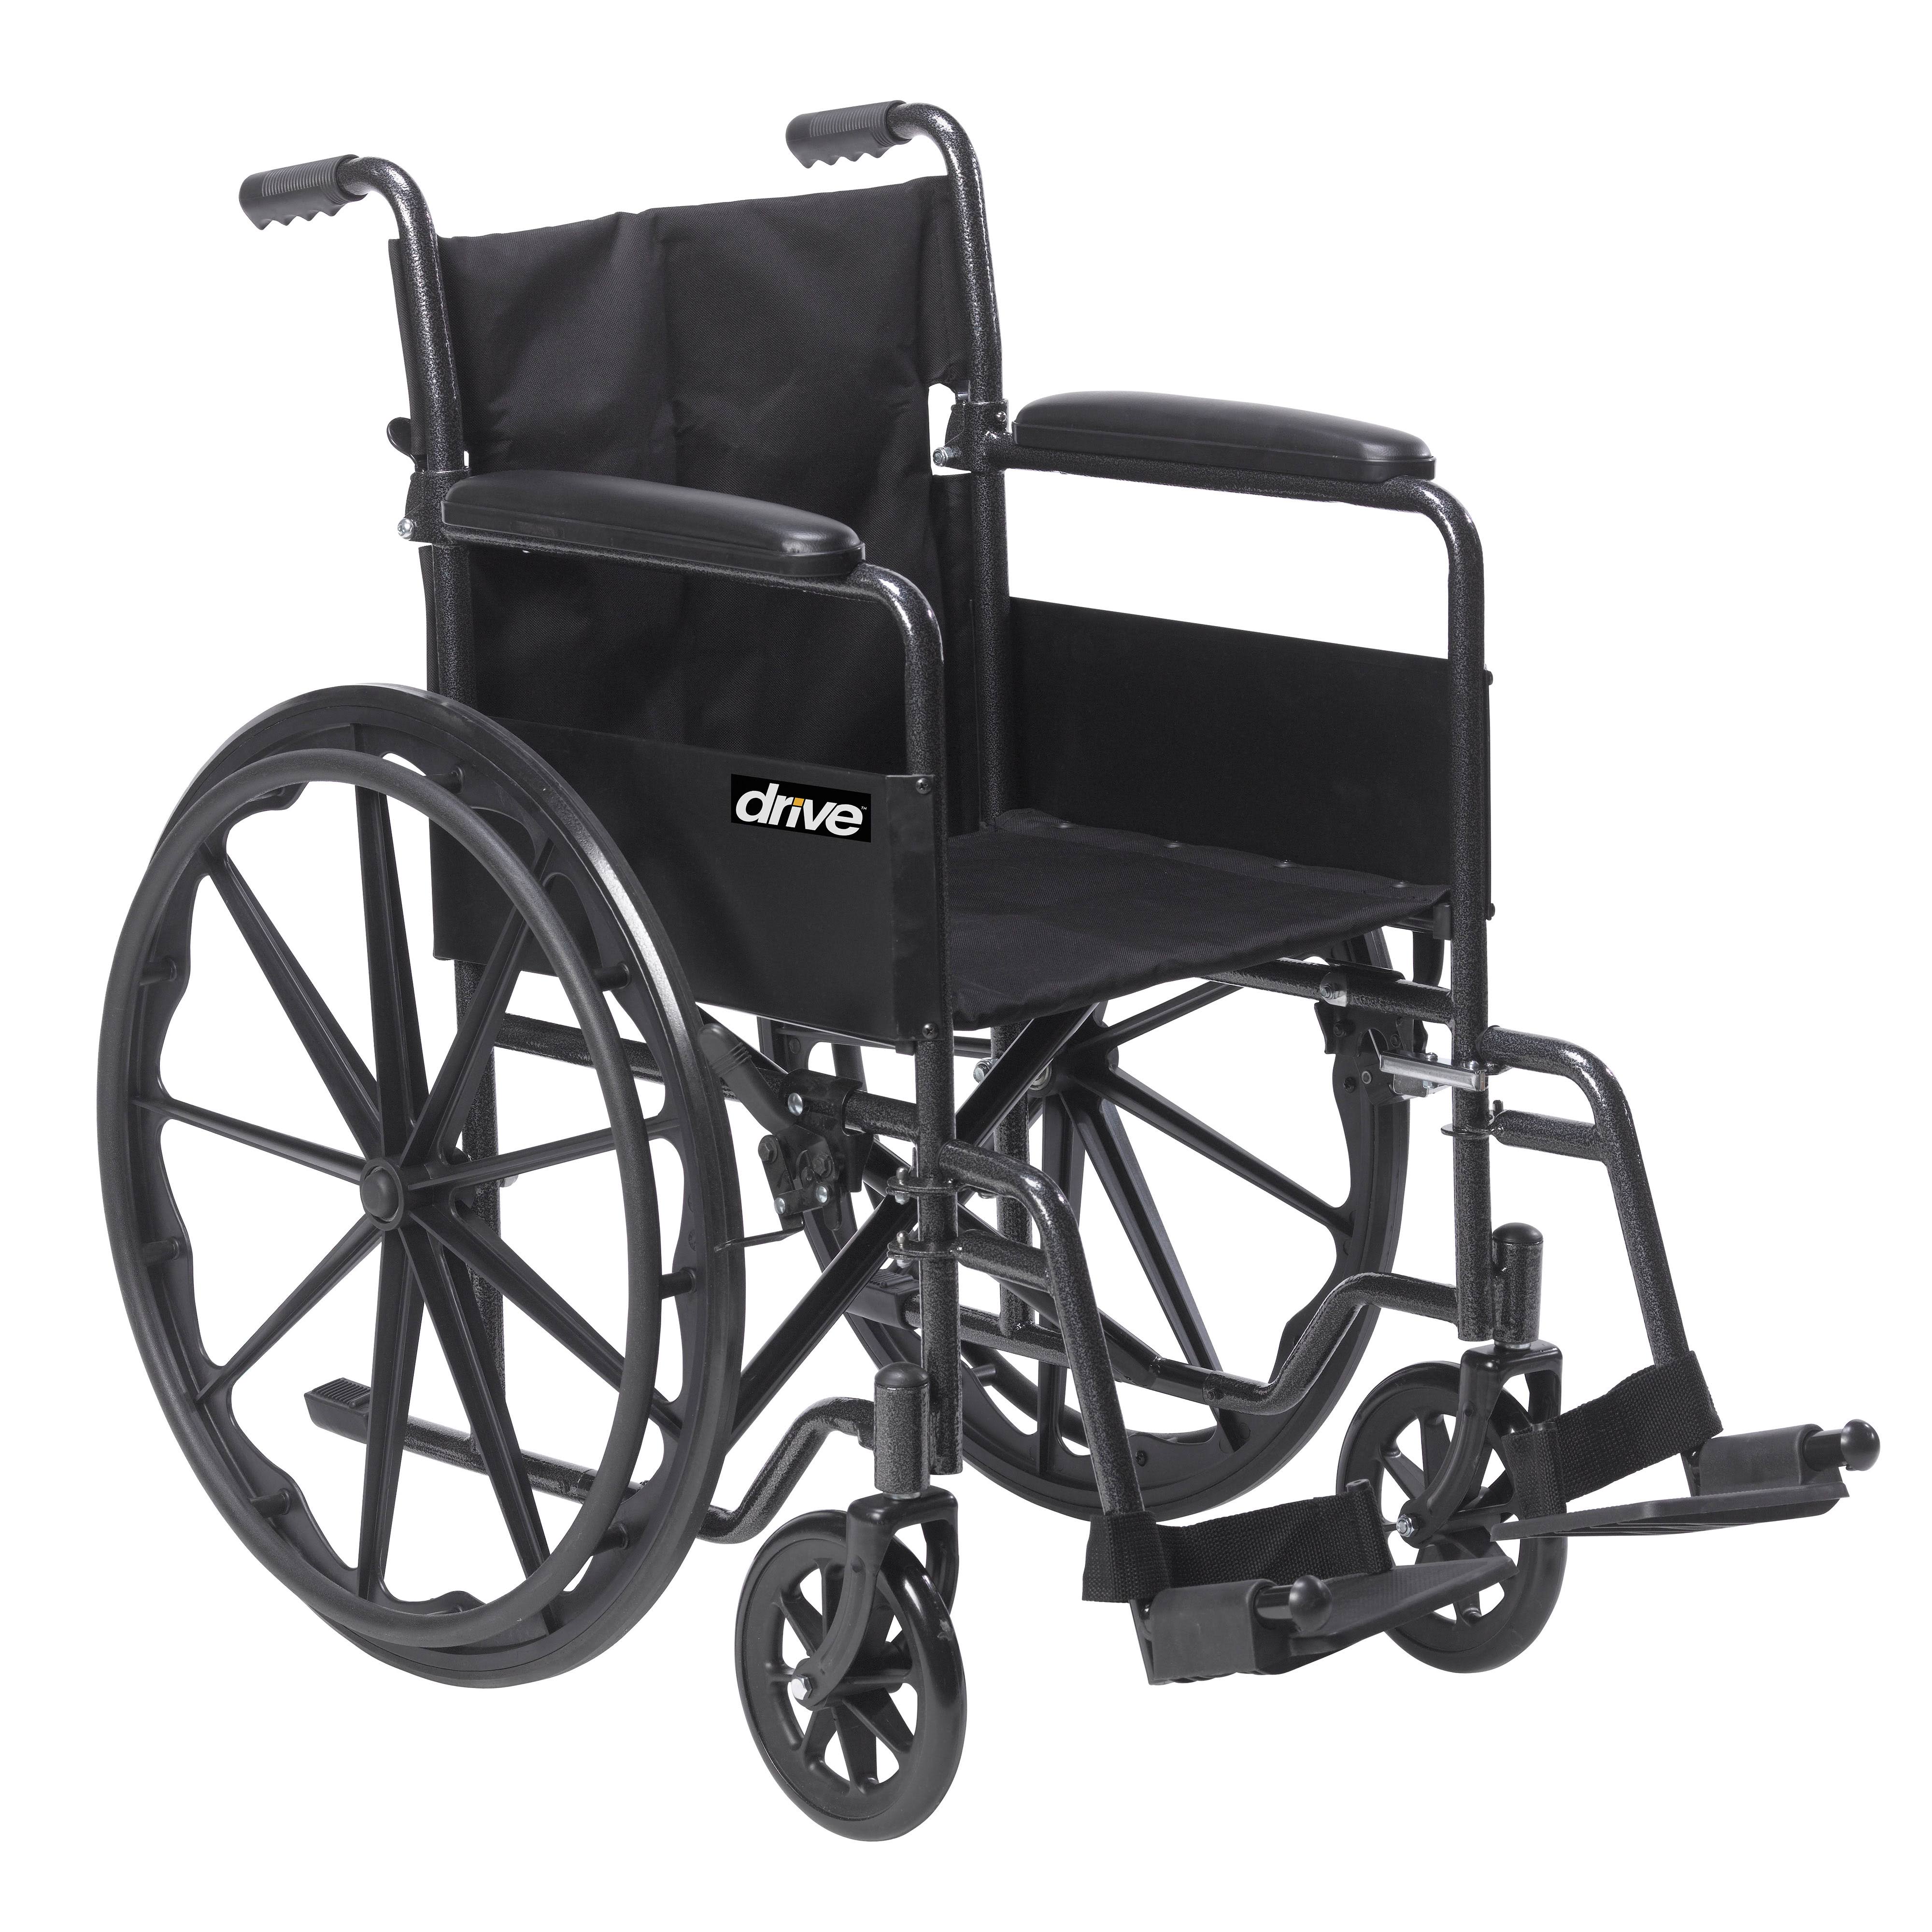 Drive Medical Fauteuil roulant Silver Sport 1 avec acco...